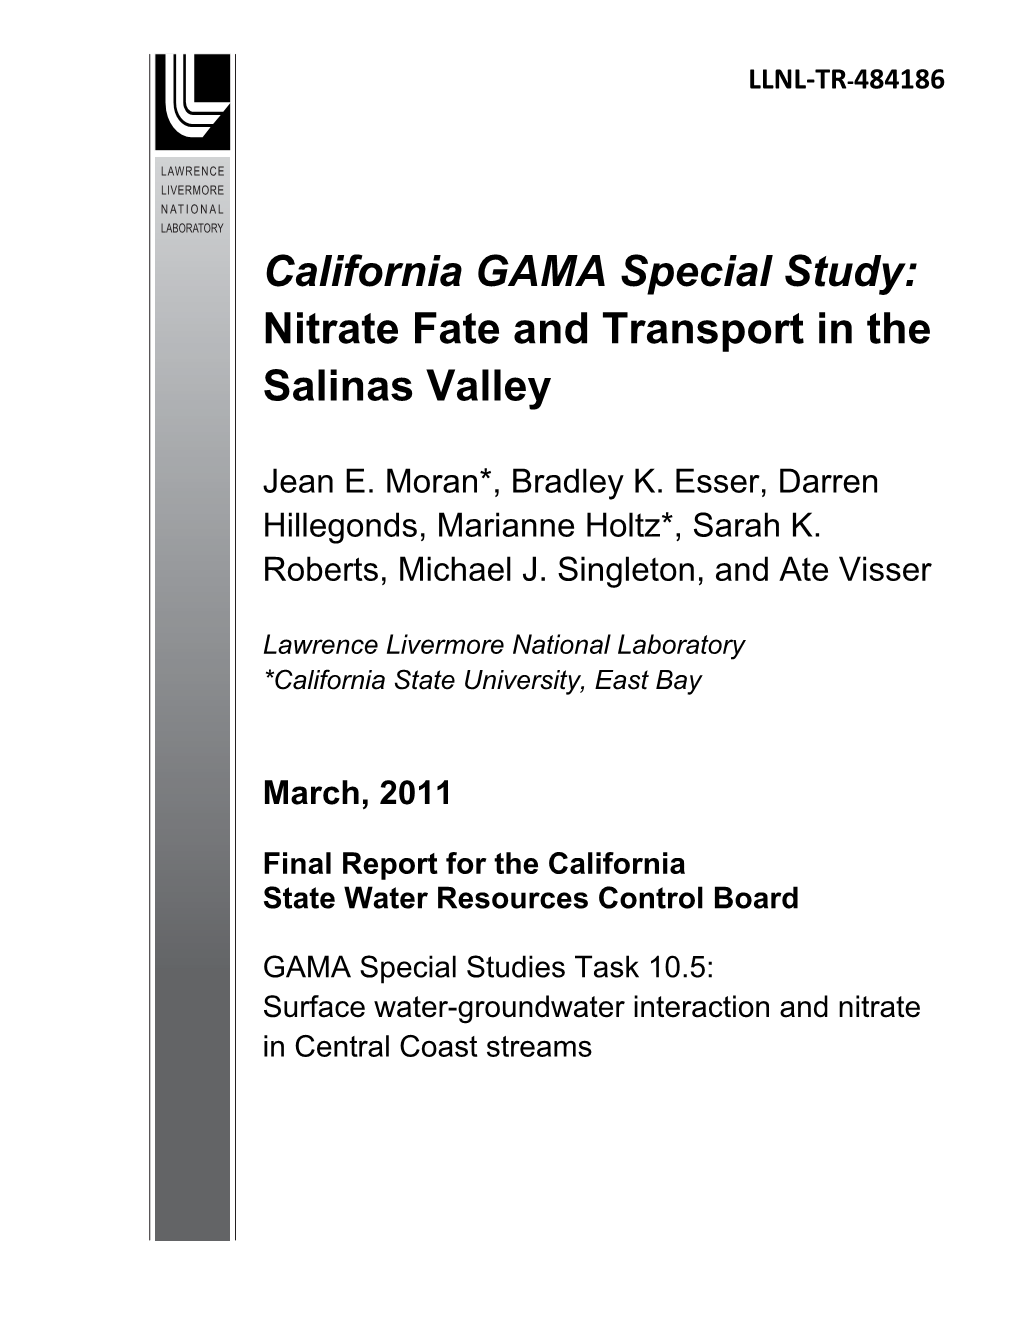 Nitrate Fate and Transport in the Salinas Valley